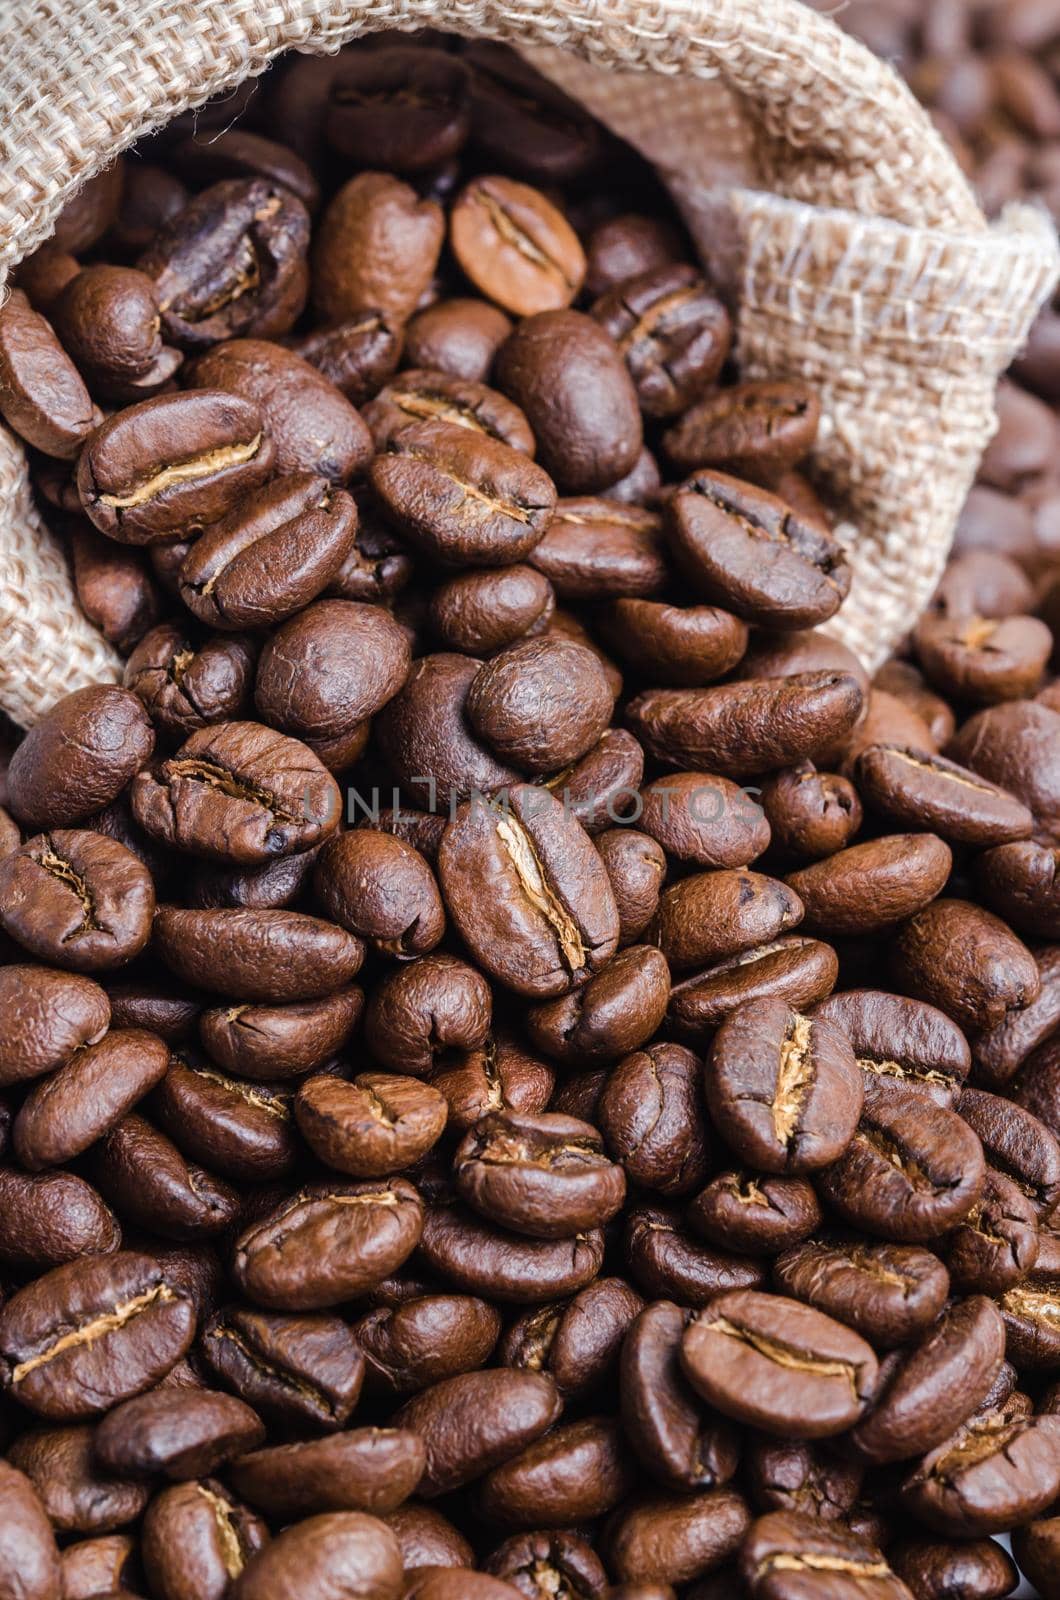 Coffee beans in sack bag. by Gamjai